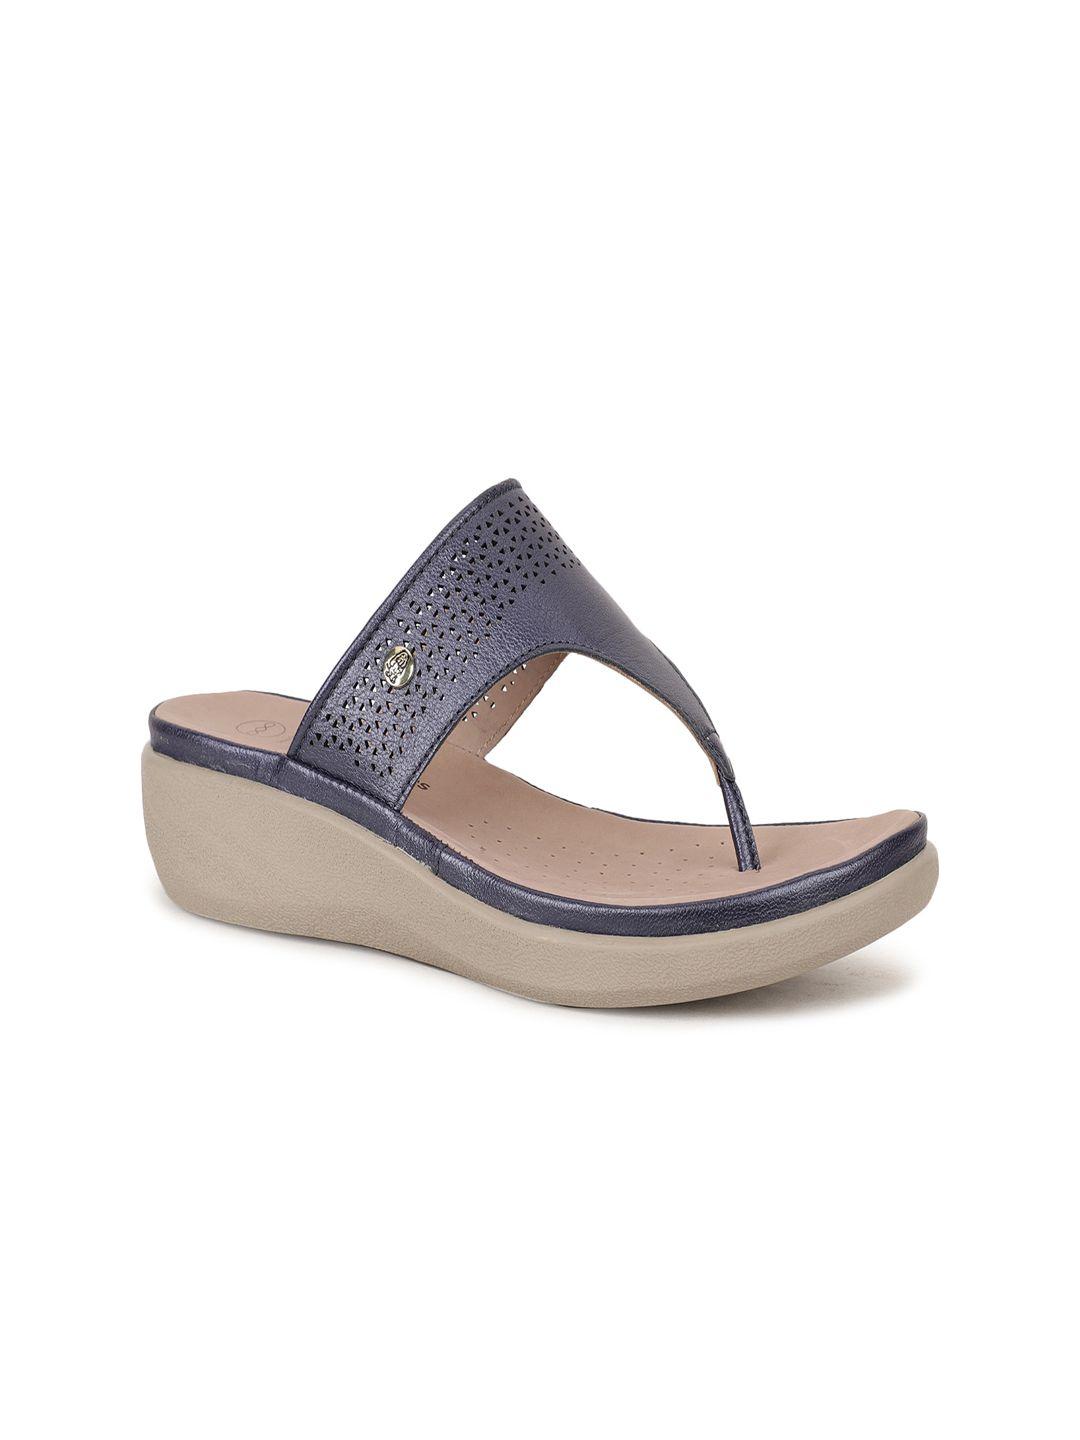 hush-puppies-blue-leather-wedge-sandals-with-laser-cuts